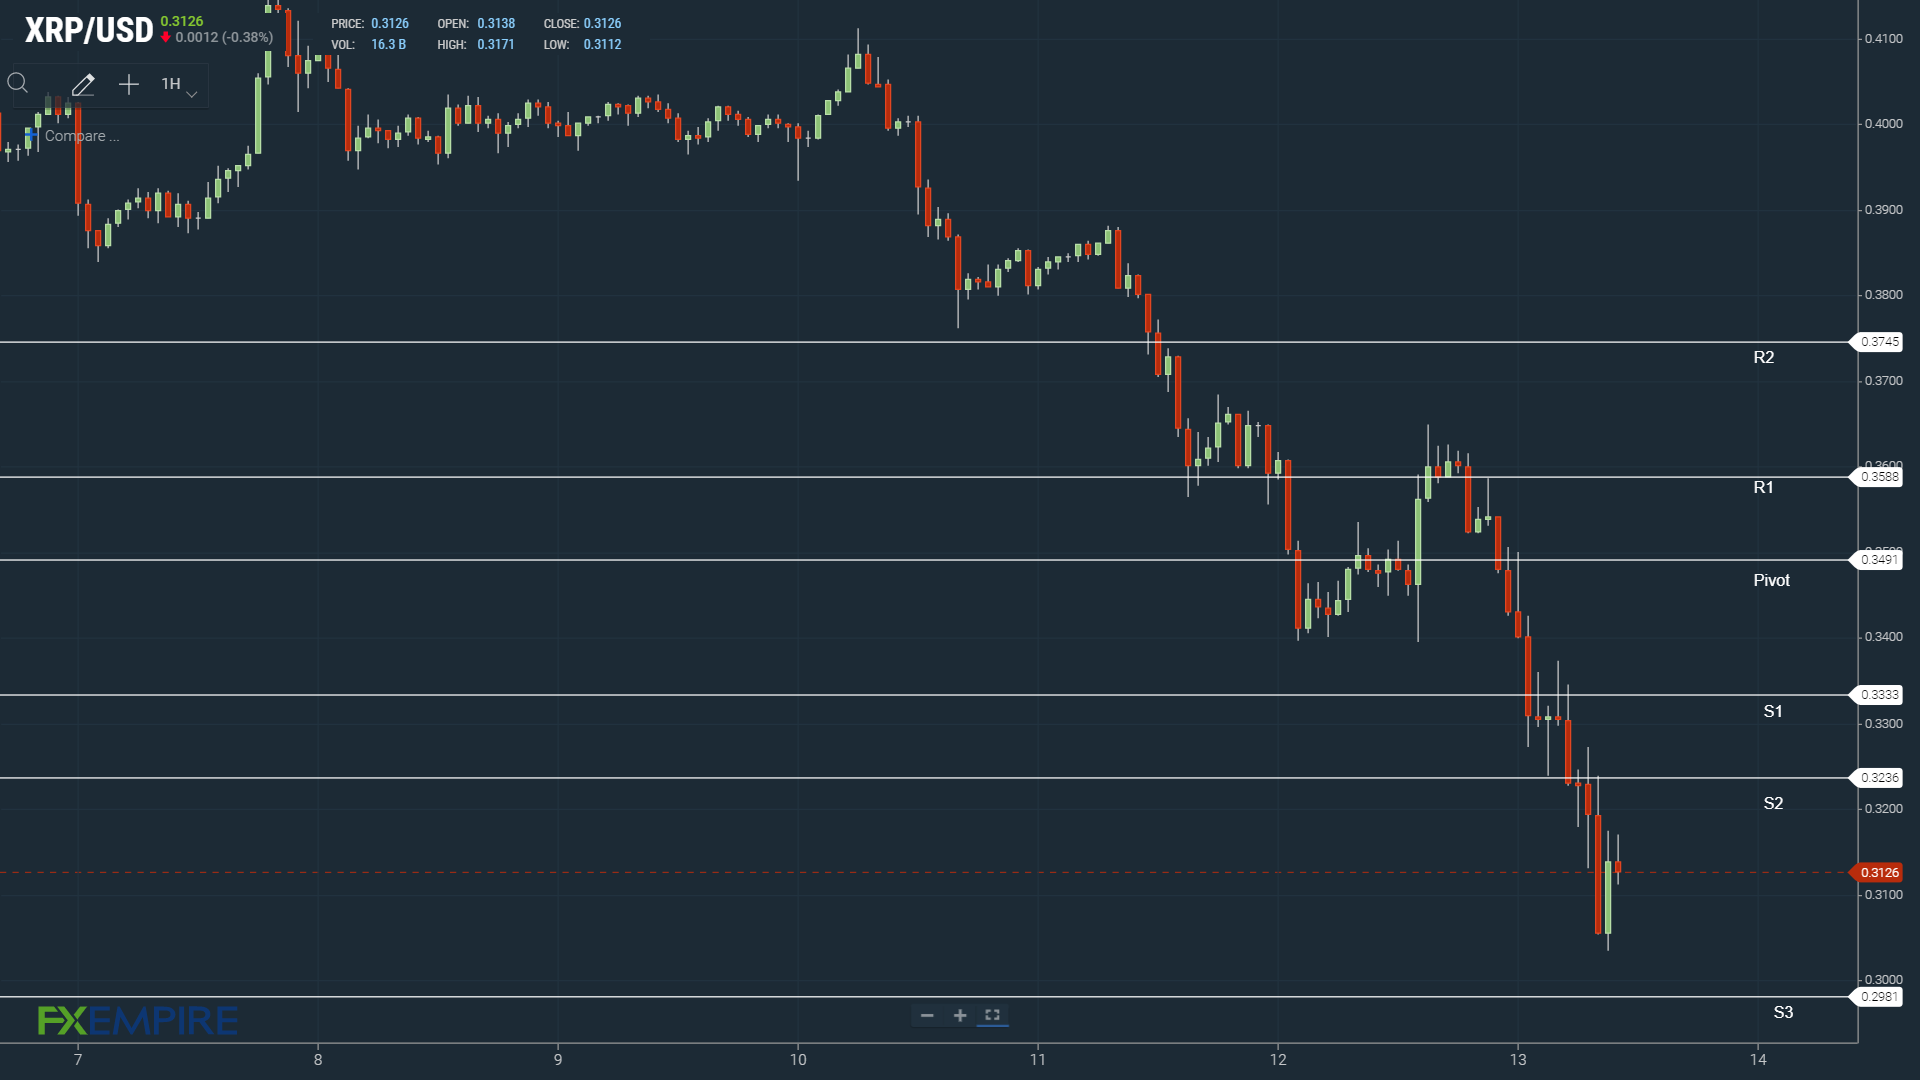 XRP tests support levels early.